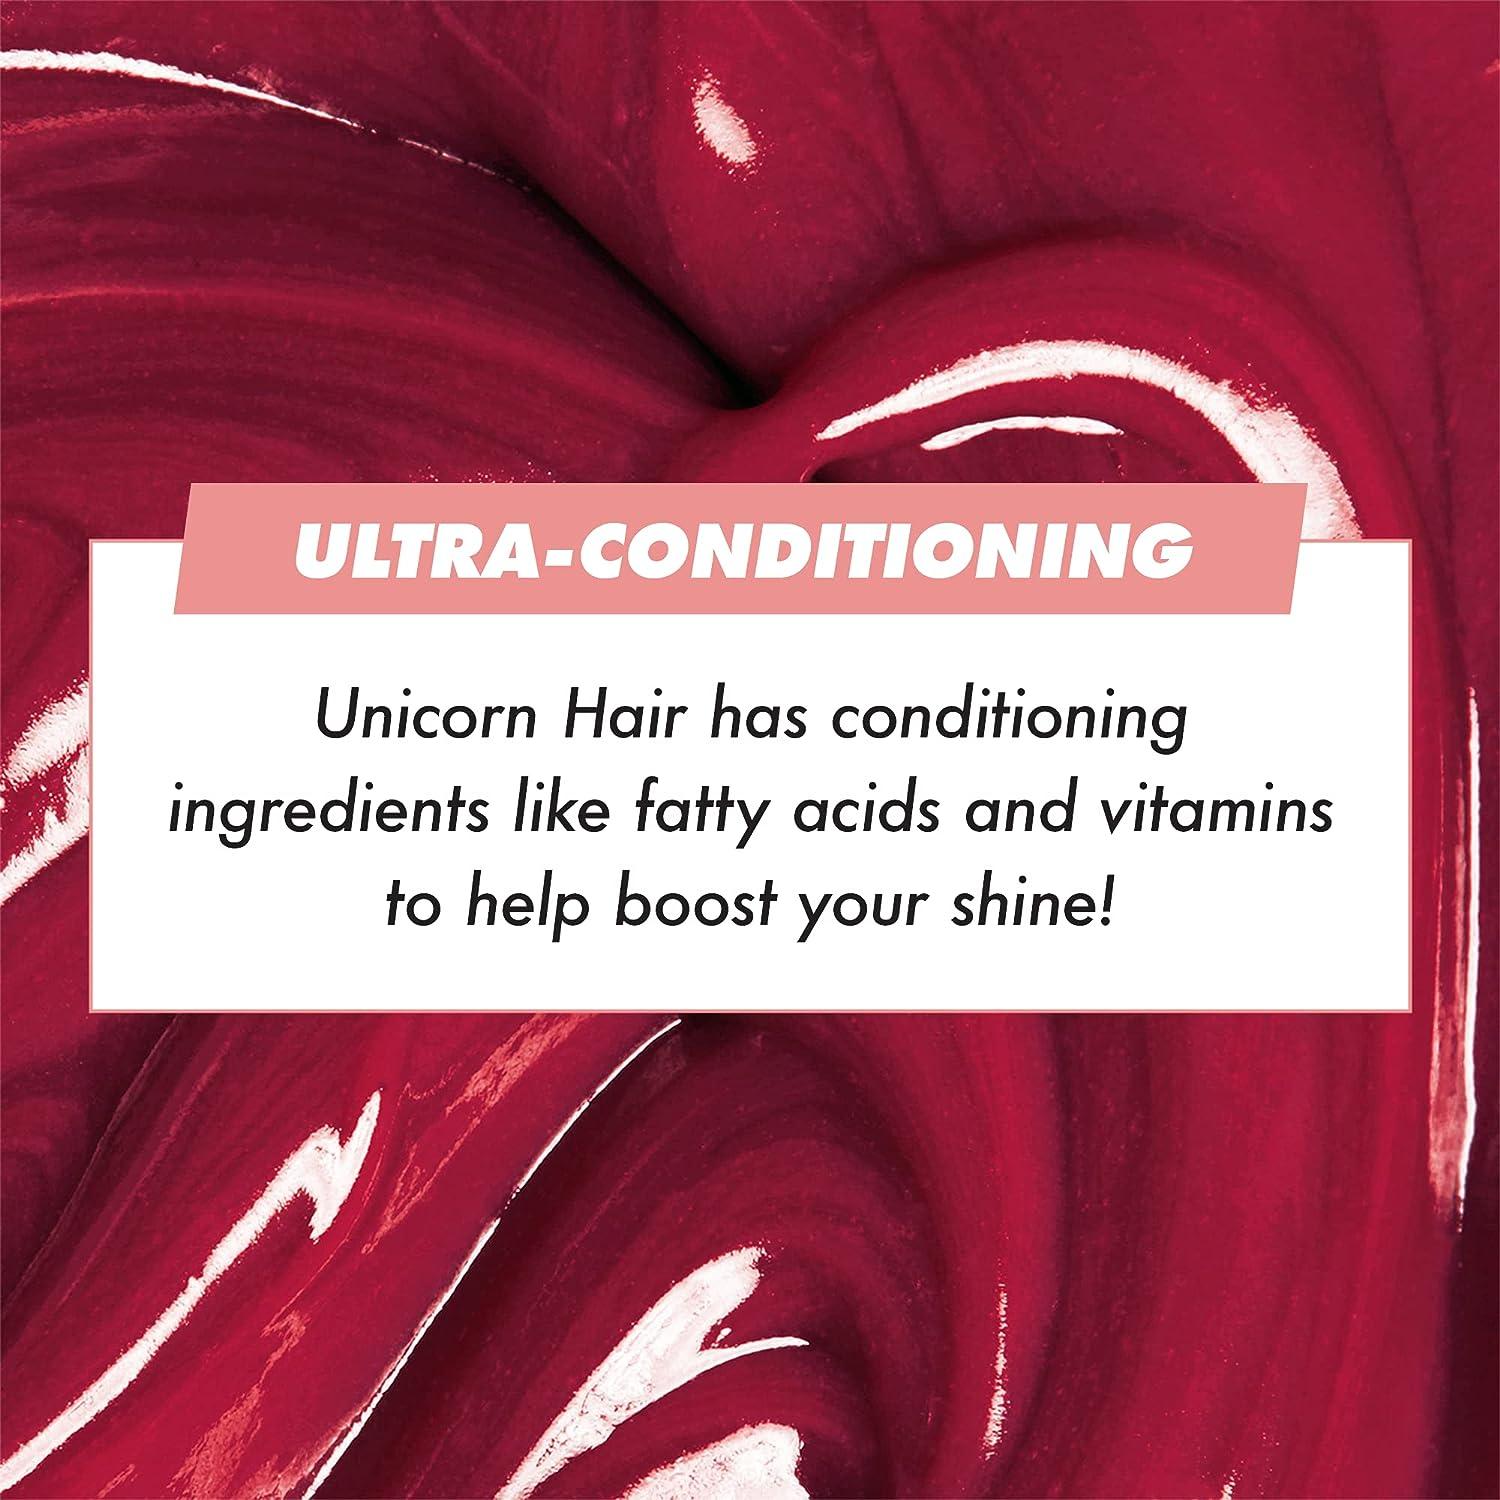 Lime Crime Unicorn Hair Dye Full Coverage Mystic (Electric Blue) - Vegan  and Cruelty Free Semi-Permanent Hair Color Conditions & Moisturizes -  Temporary Blue Hair Dye With Sugary Citrus Vanilla Scent